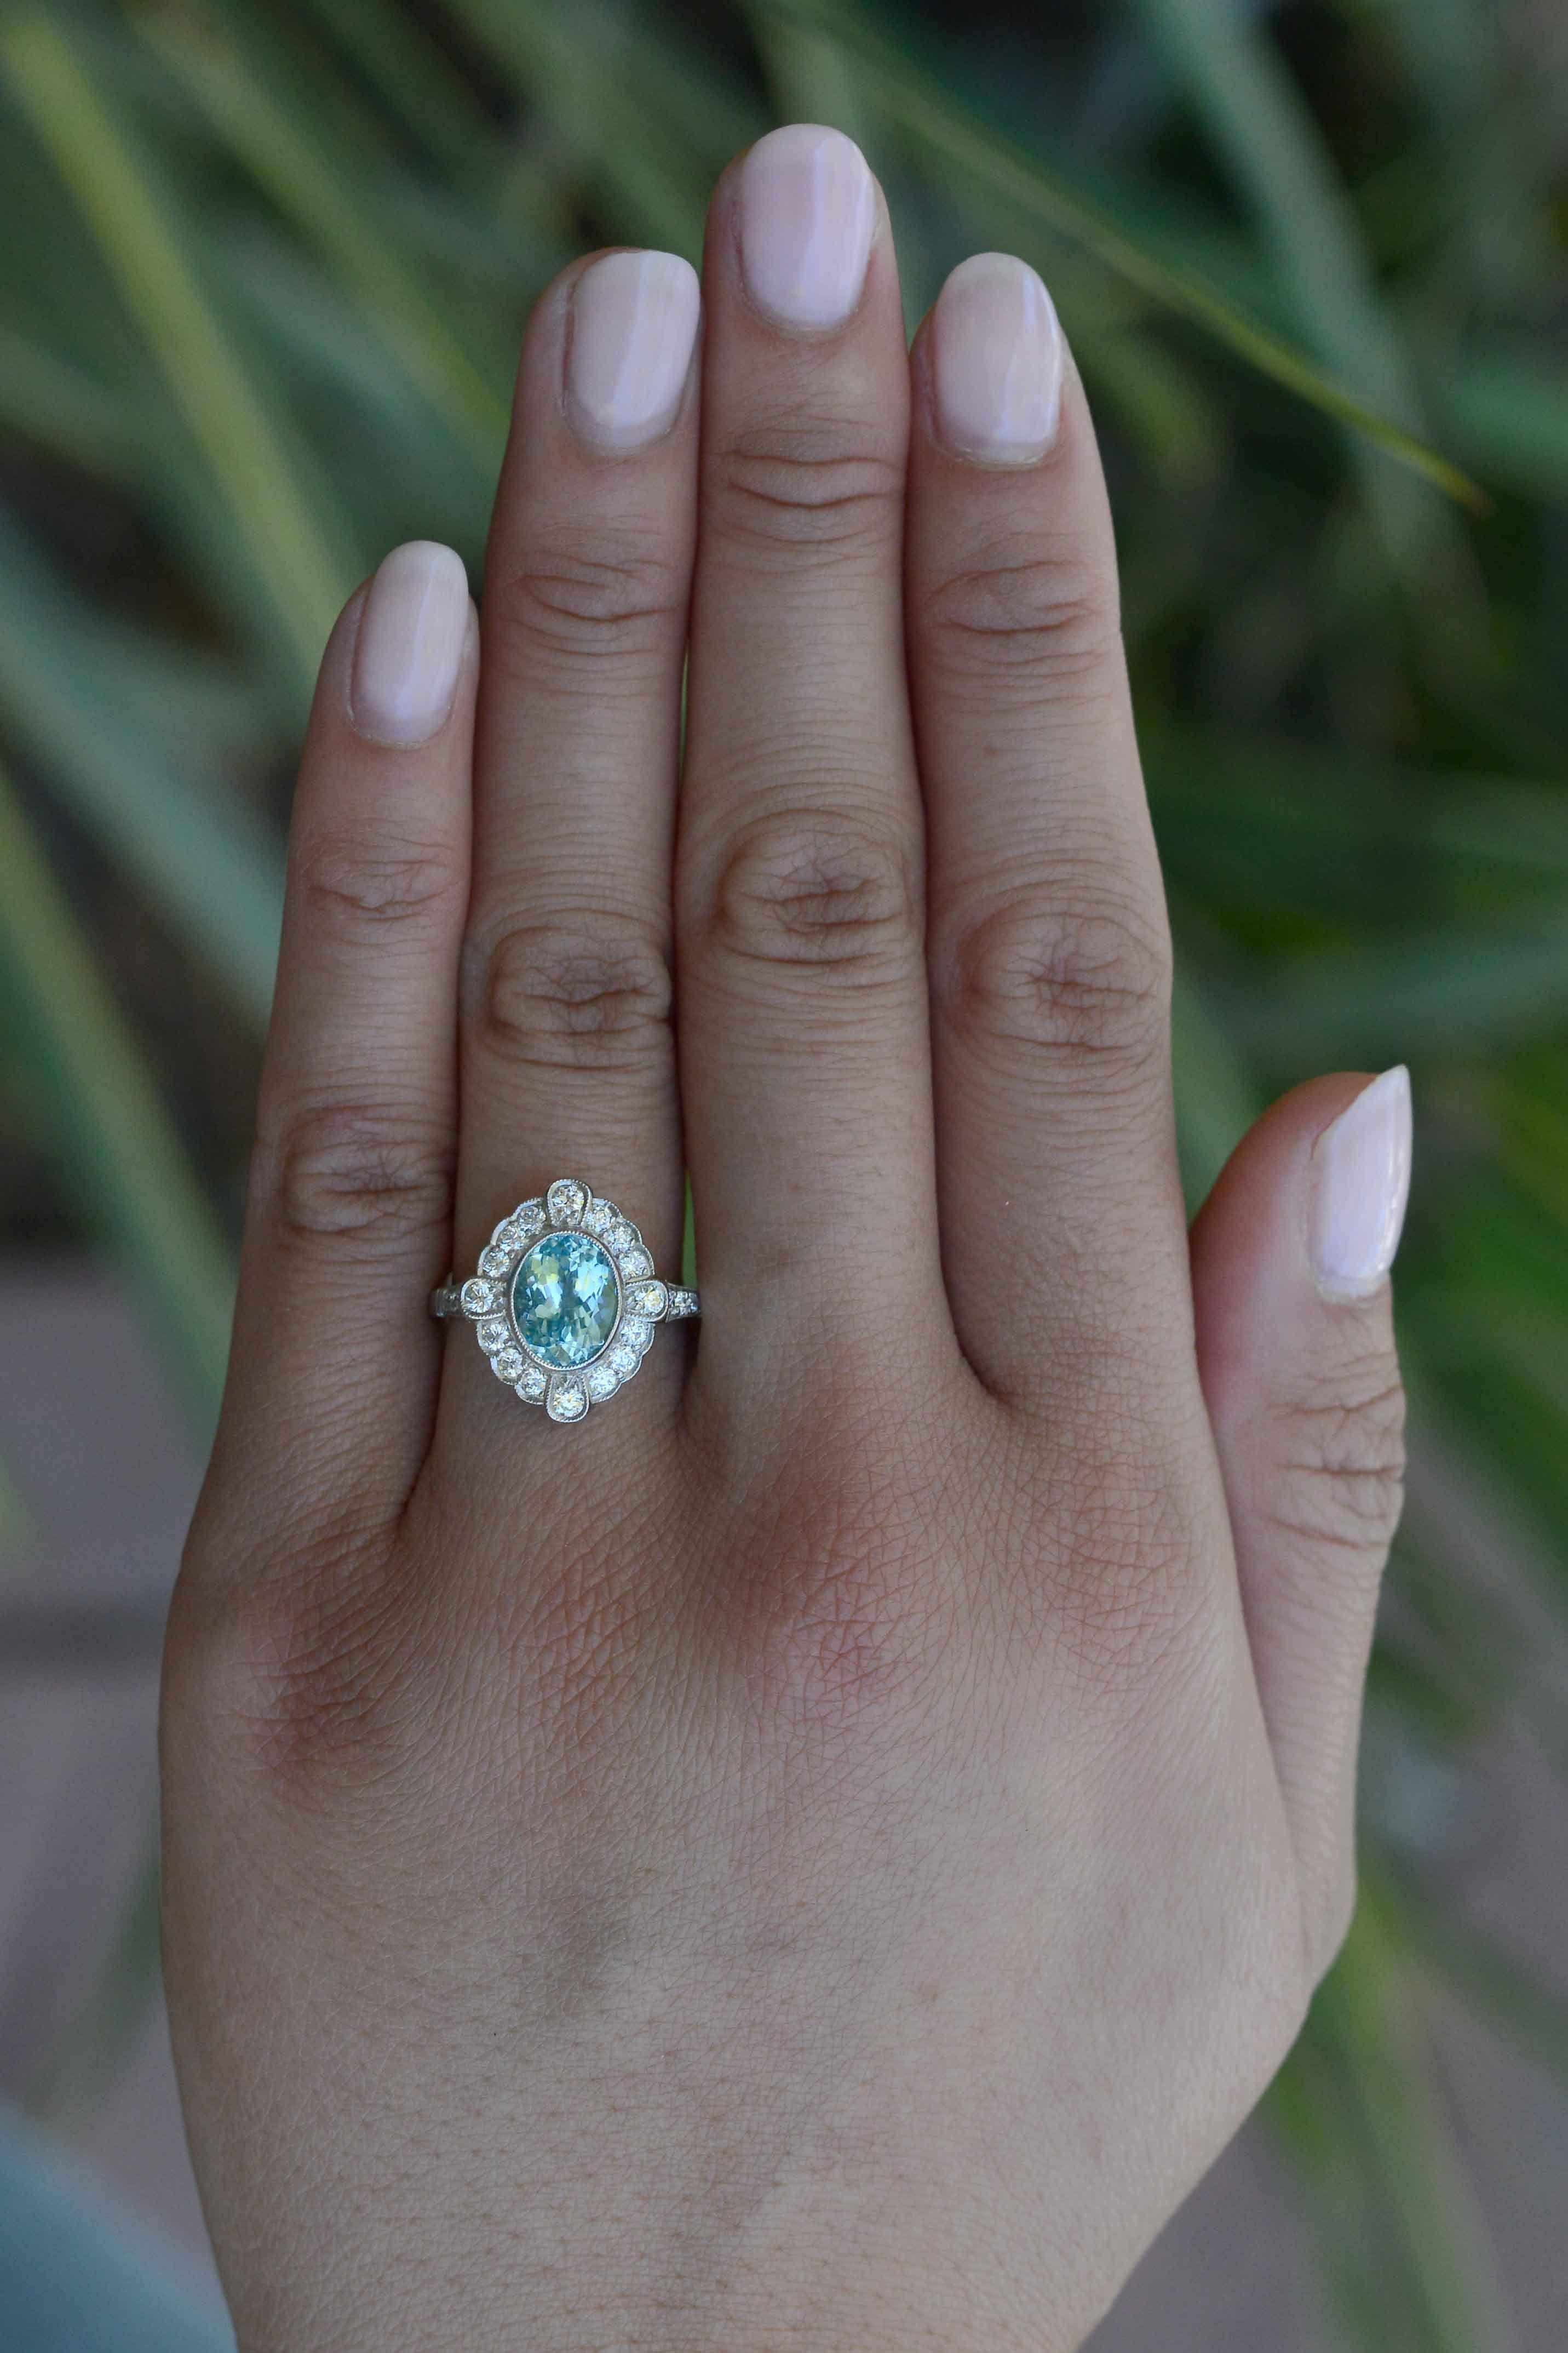 This gemstone engagement ring is truly irresistible. Showing off a mesmerizing Paraiba tourmaline with an incredible Caribbean blue neon color and luster. Surrounding the milgrained, oval setting are 22 glittering diamonds that make the ring bright